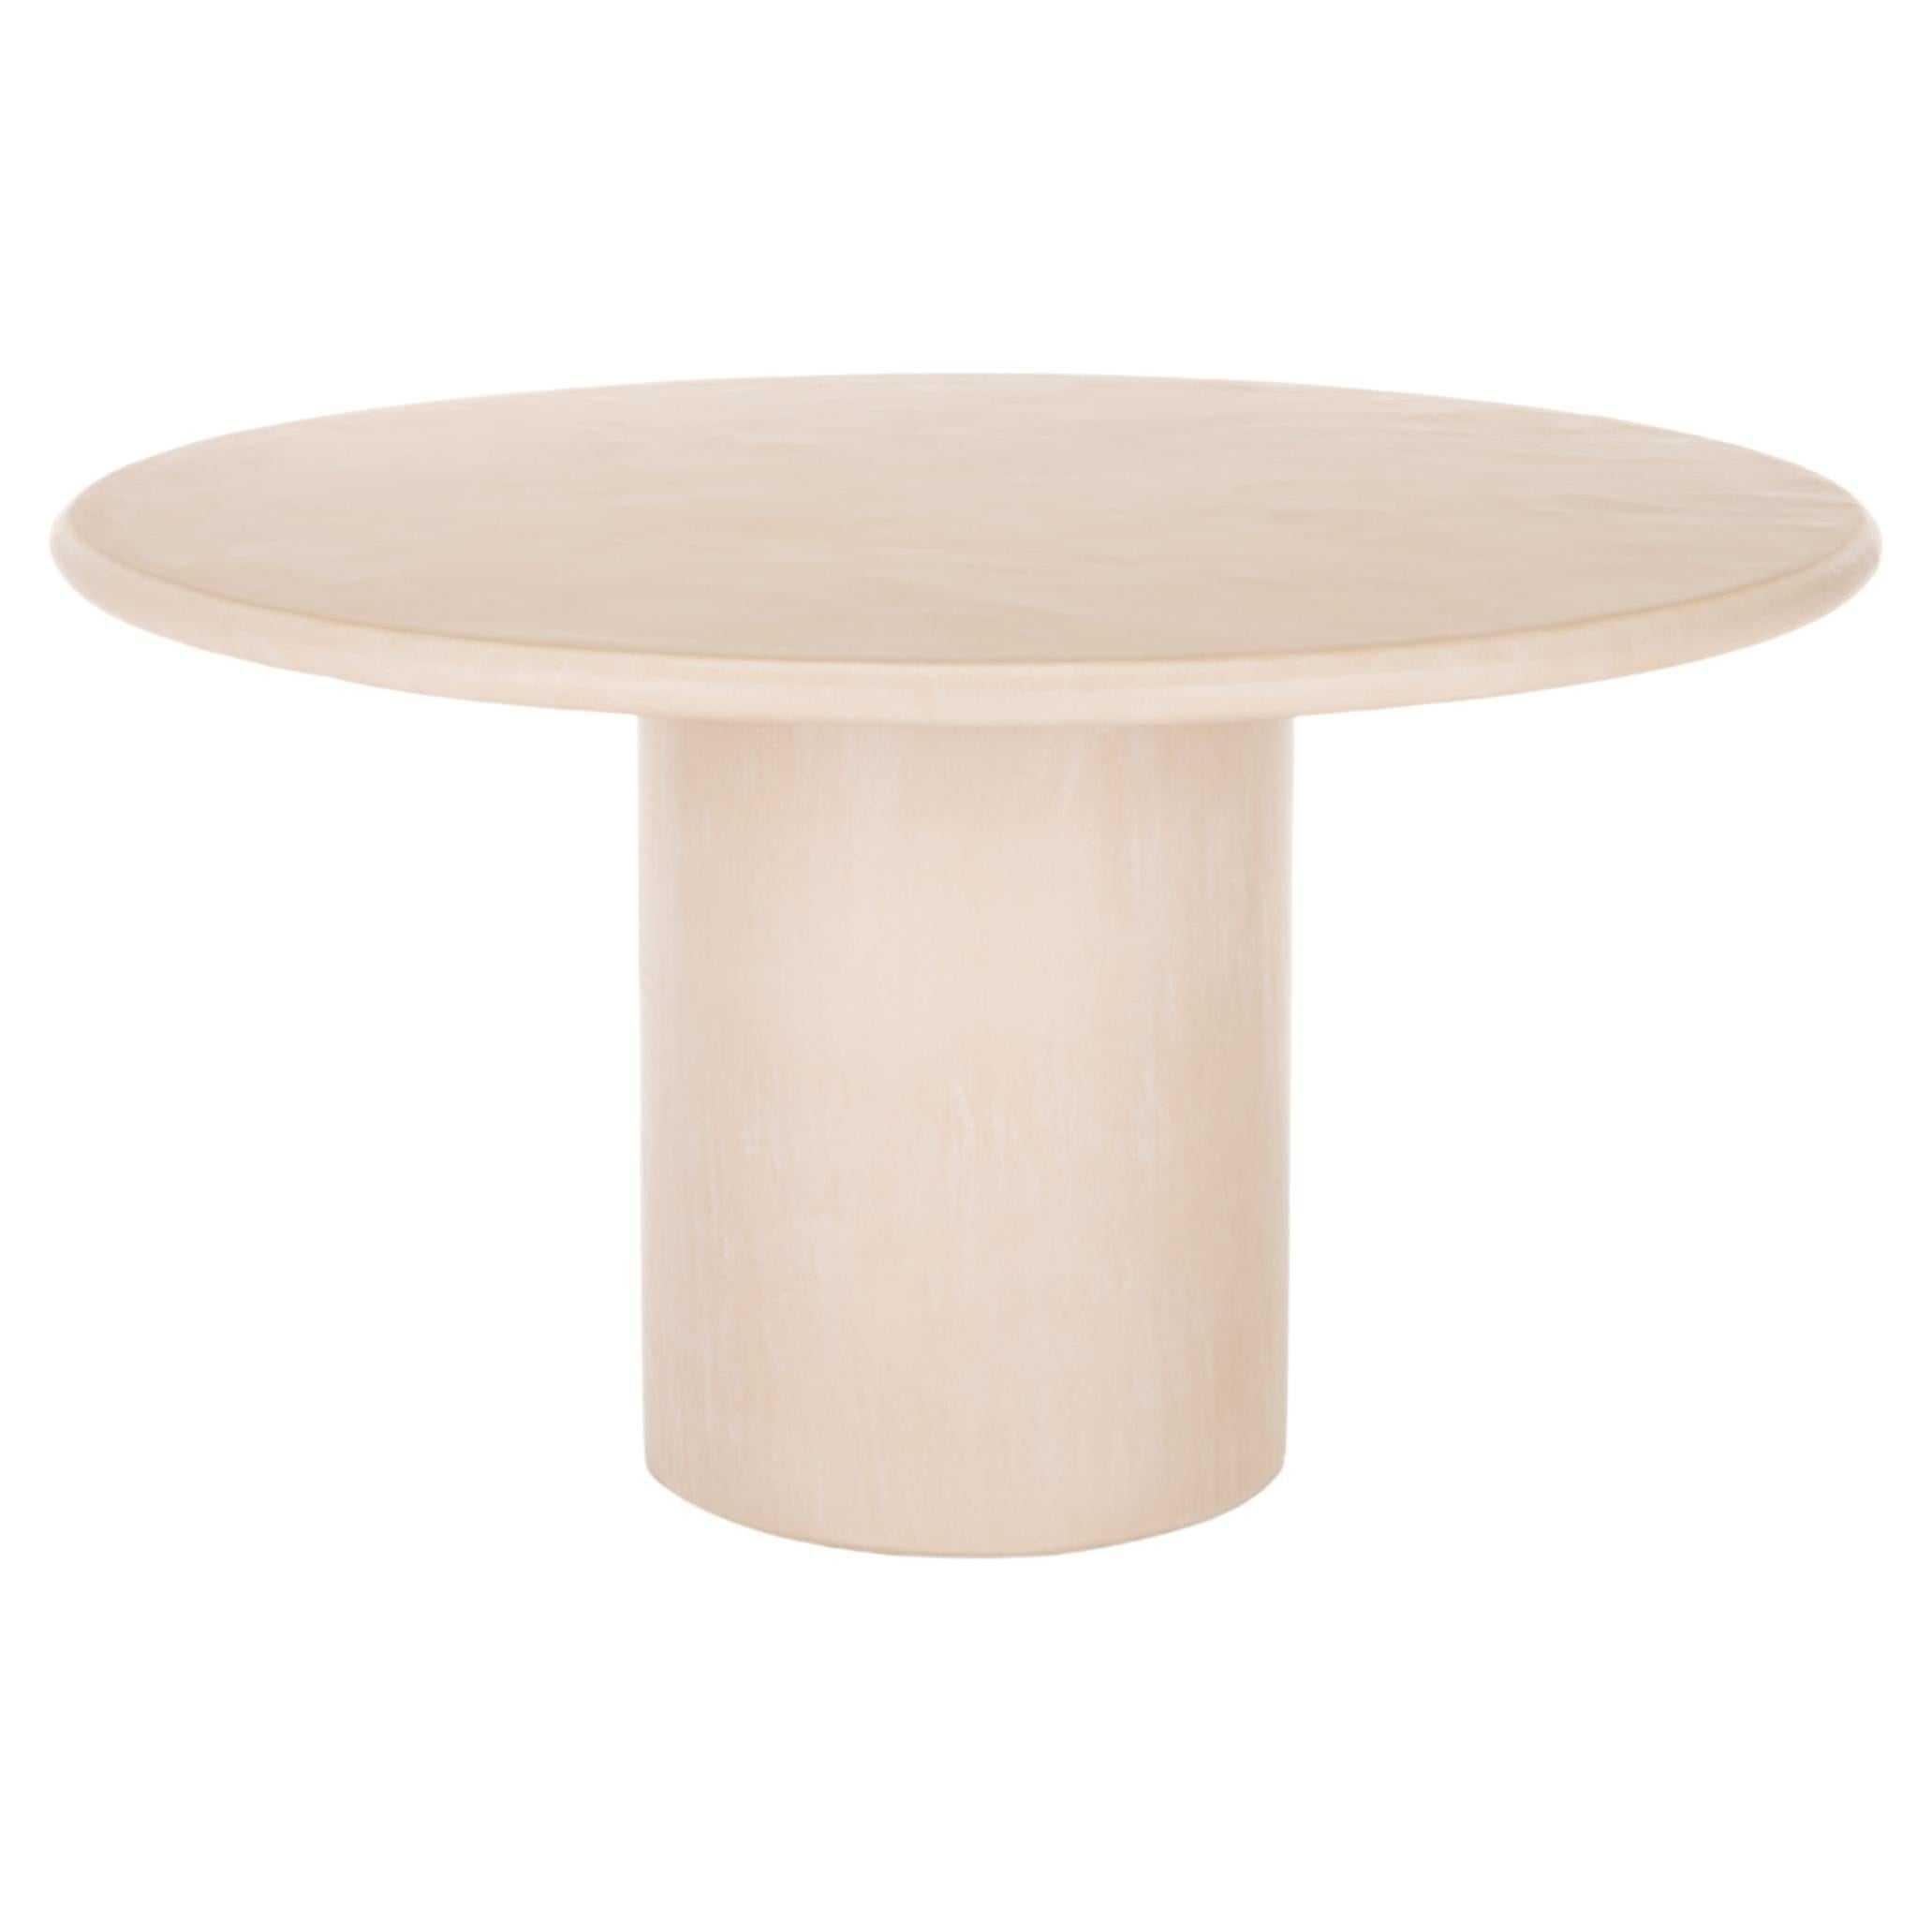 Contemporary Round Natural Plaster "Column" Table 180cm by Isabelle Beaumont